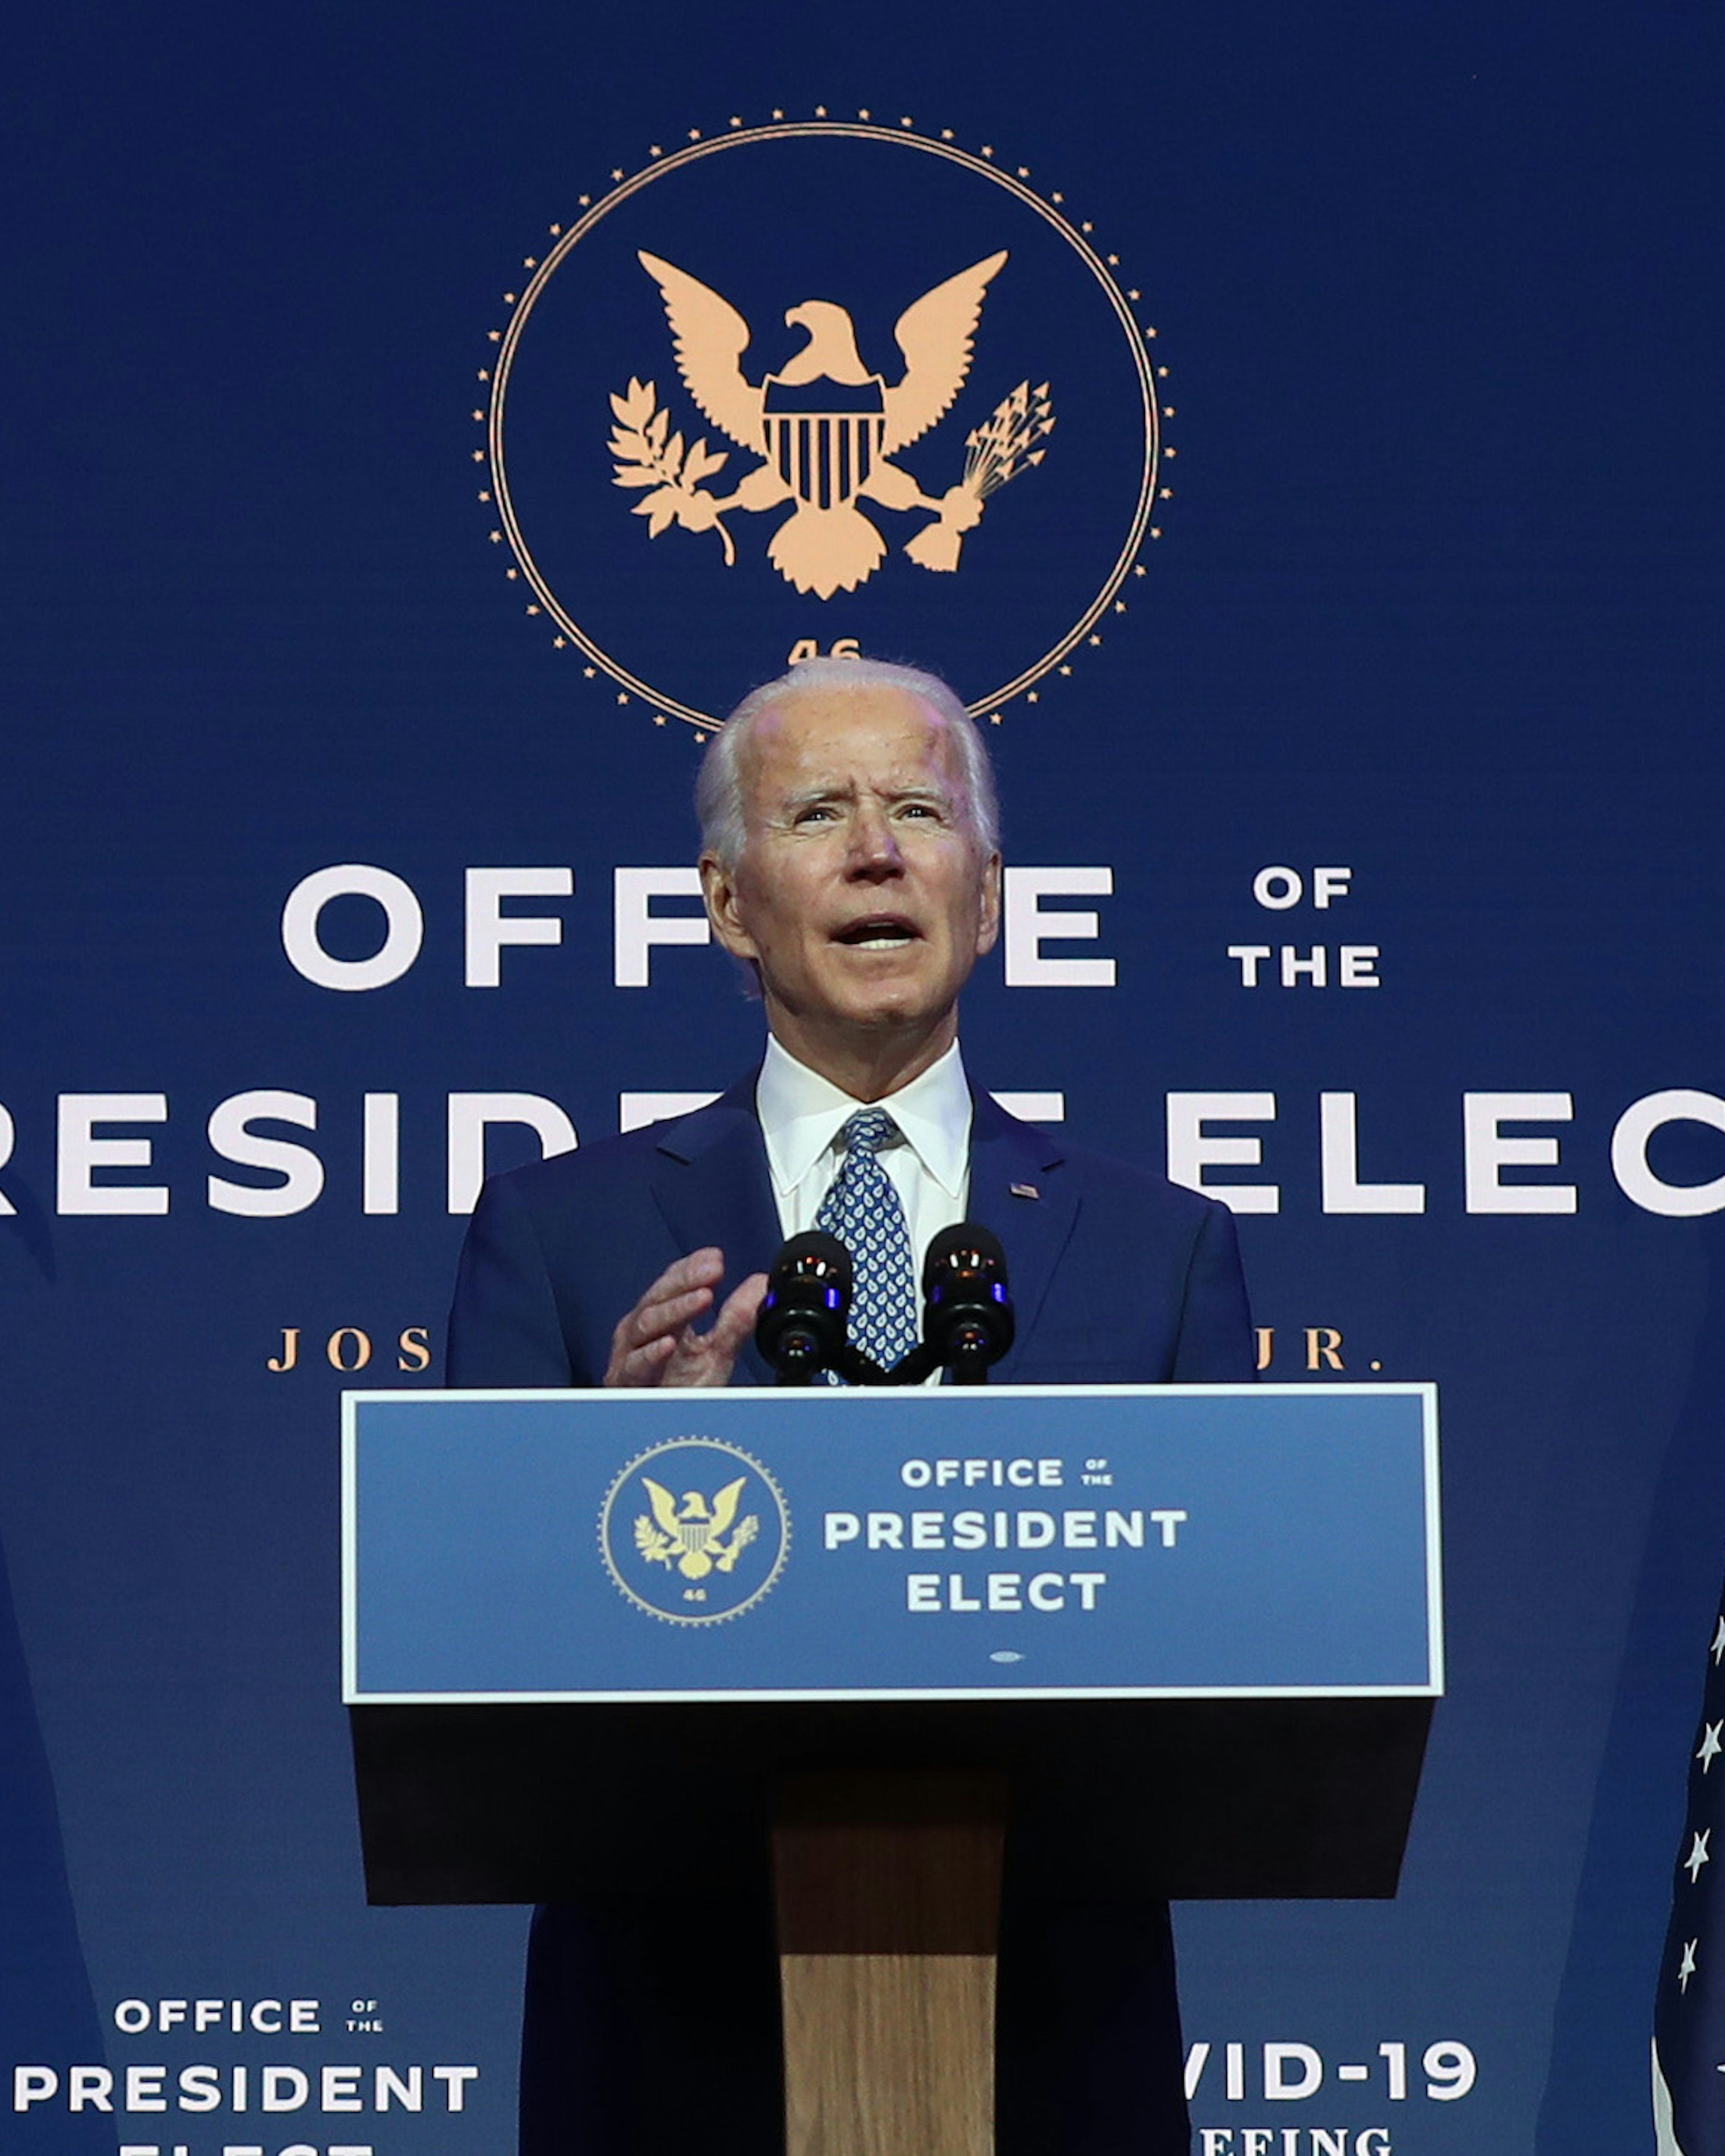 Joe Biden speaks to the media after receiving a briefing from the transition COVID-19 advisory board on November 09, 2020 at the Queen Theater in Wilmington, Delaware. Mr. Biden spoke about how his administration would respond to the coronavirus pandemic. (Photo by Joe Raedle/Getty Images)